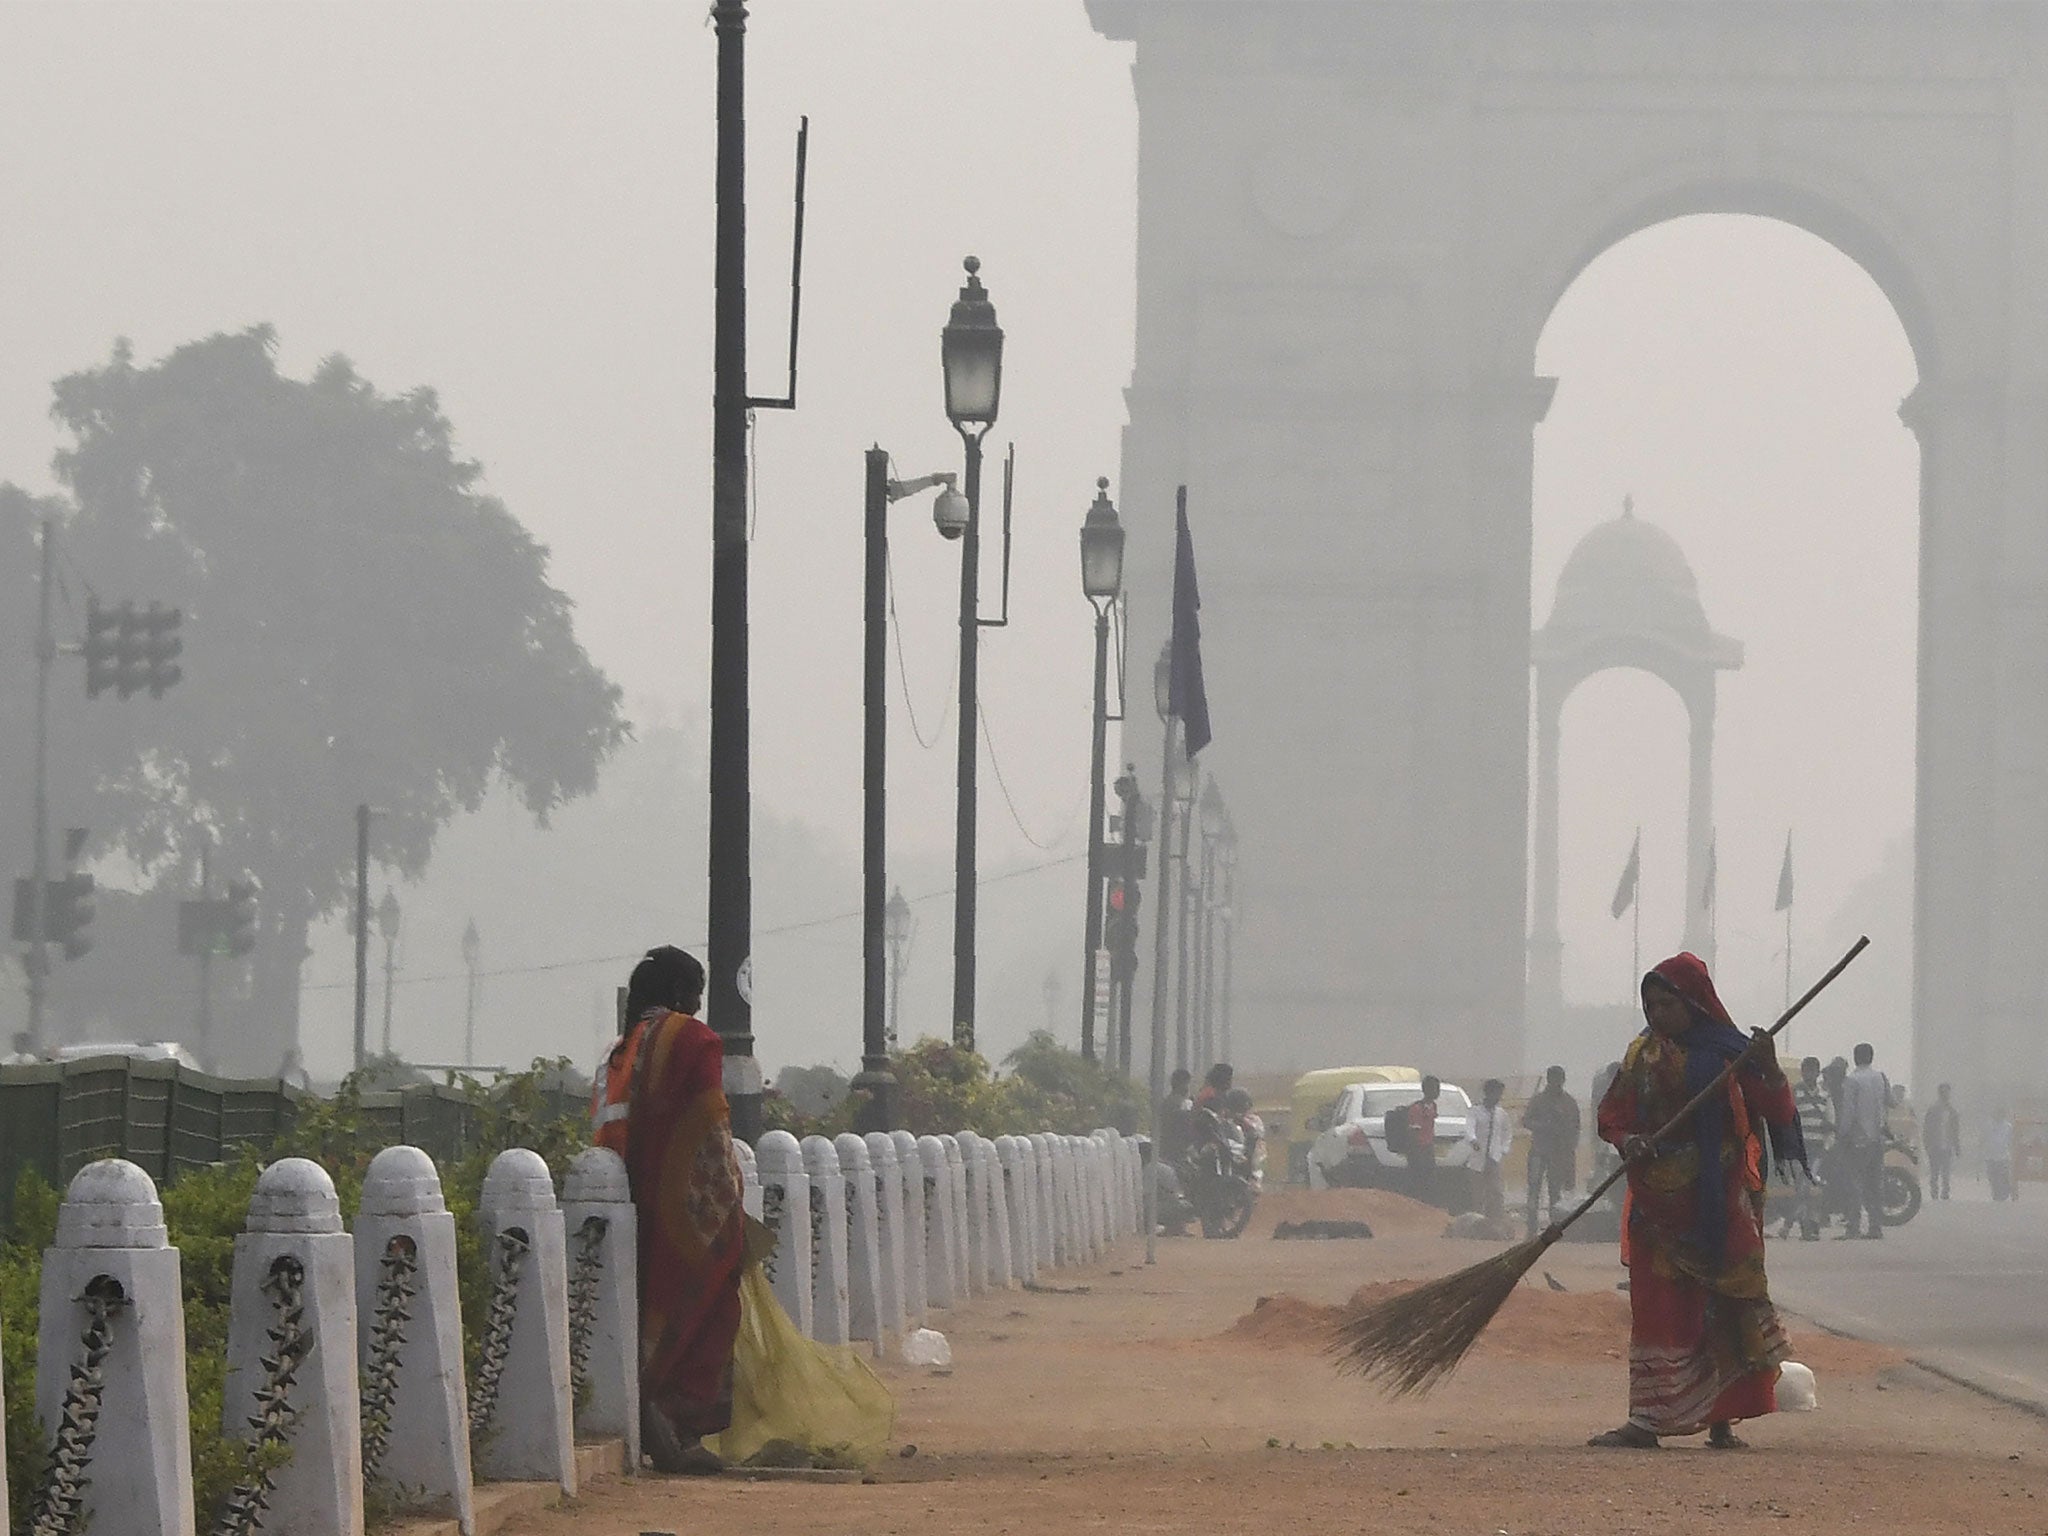 Delhi is now the world’s most polluted capital according to the WHO, with pollution levels that regularly exceed those of Beijing